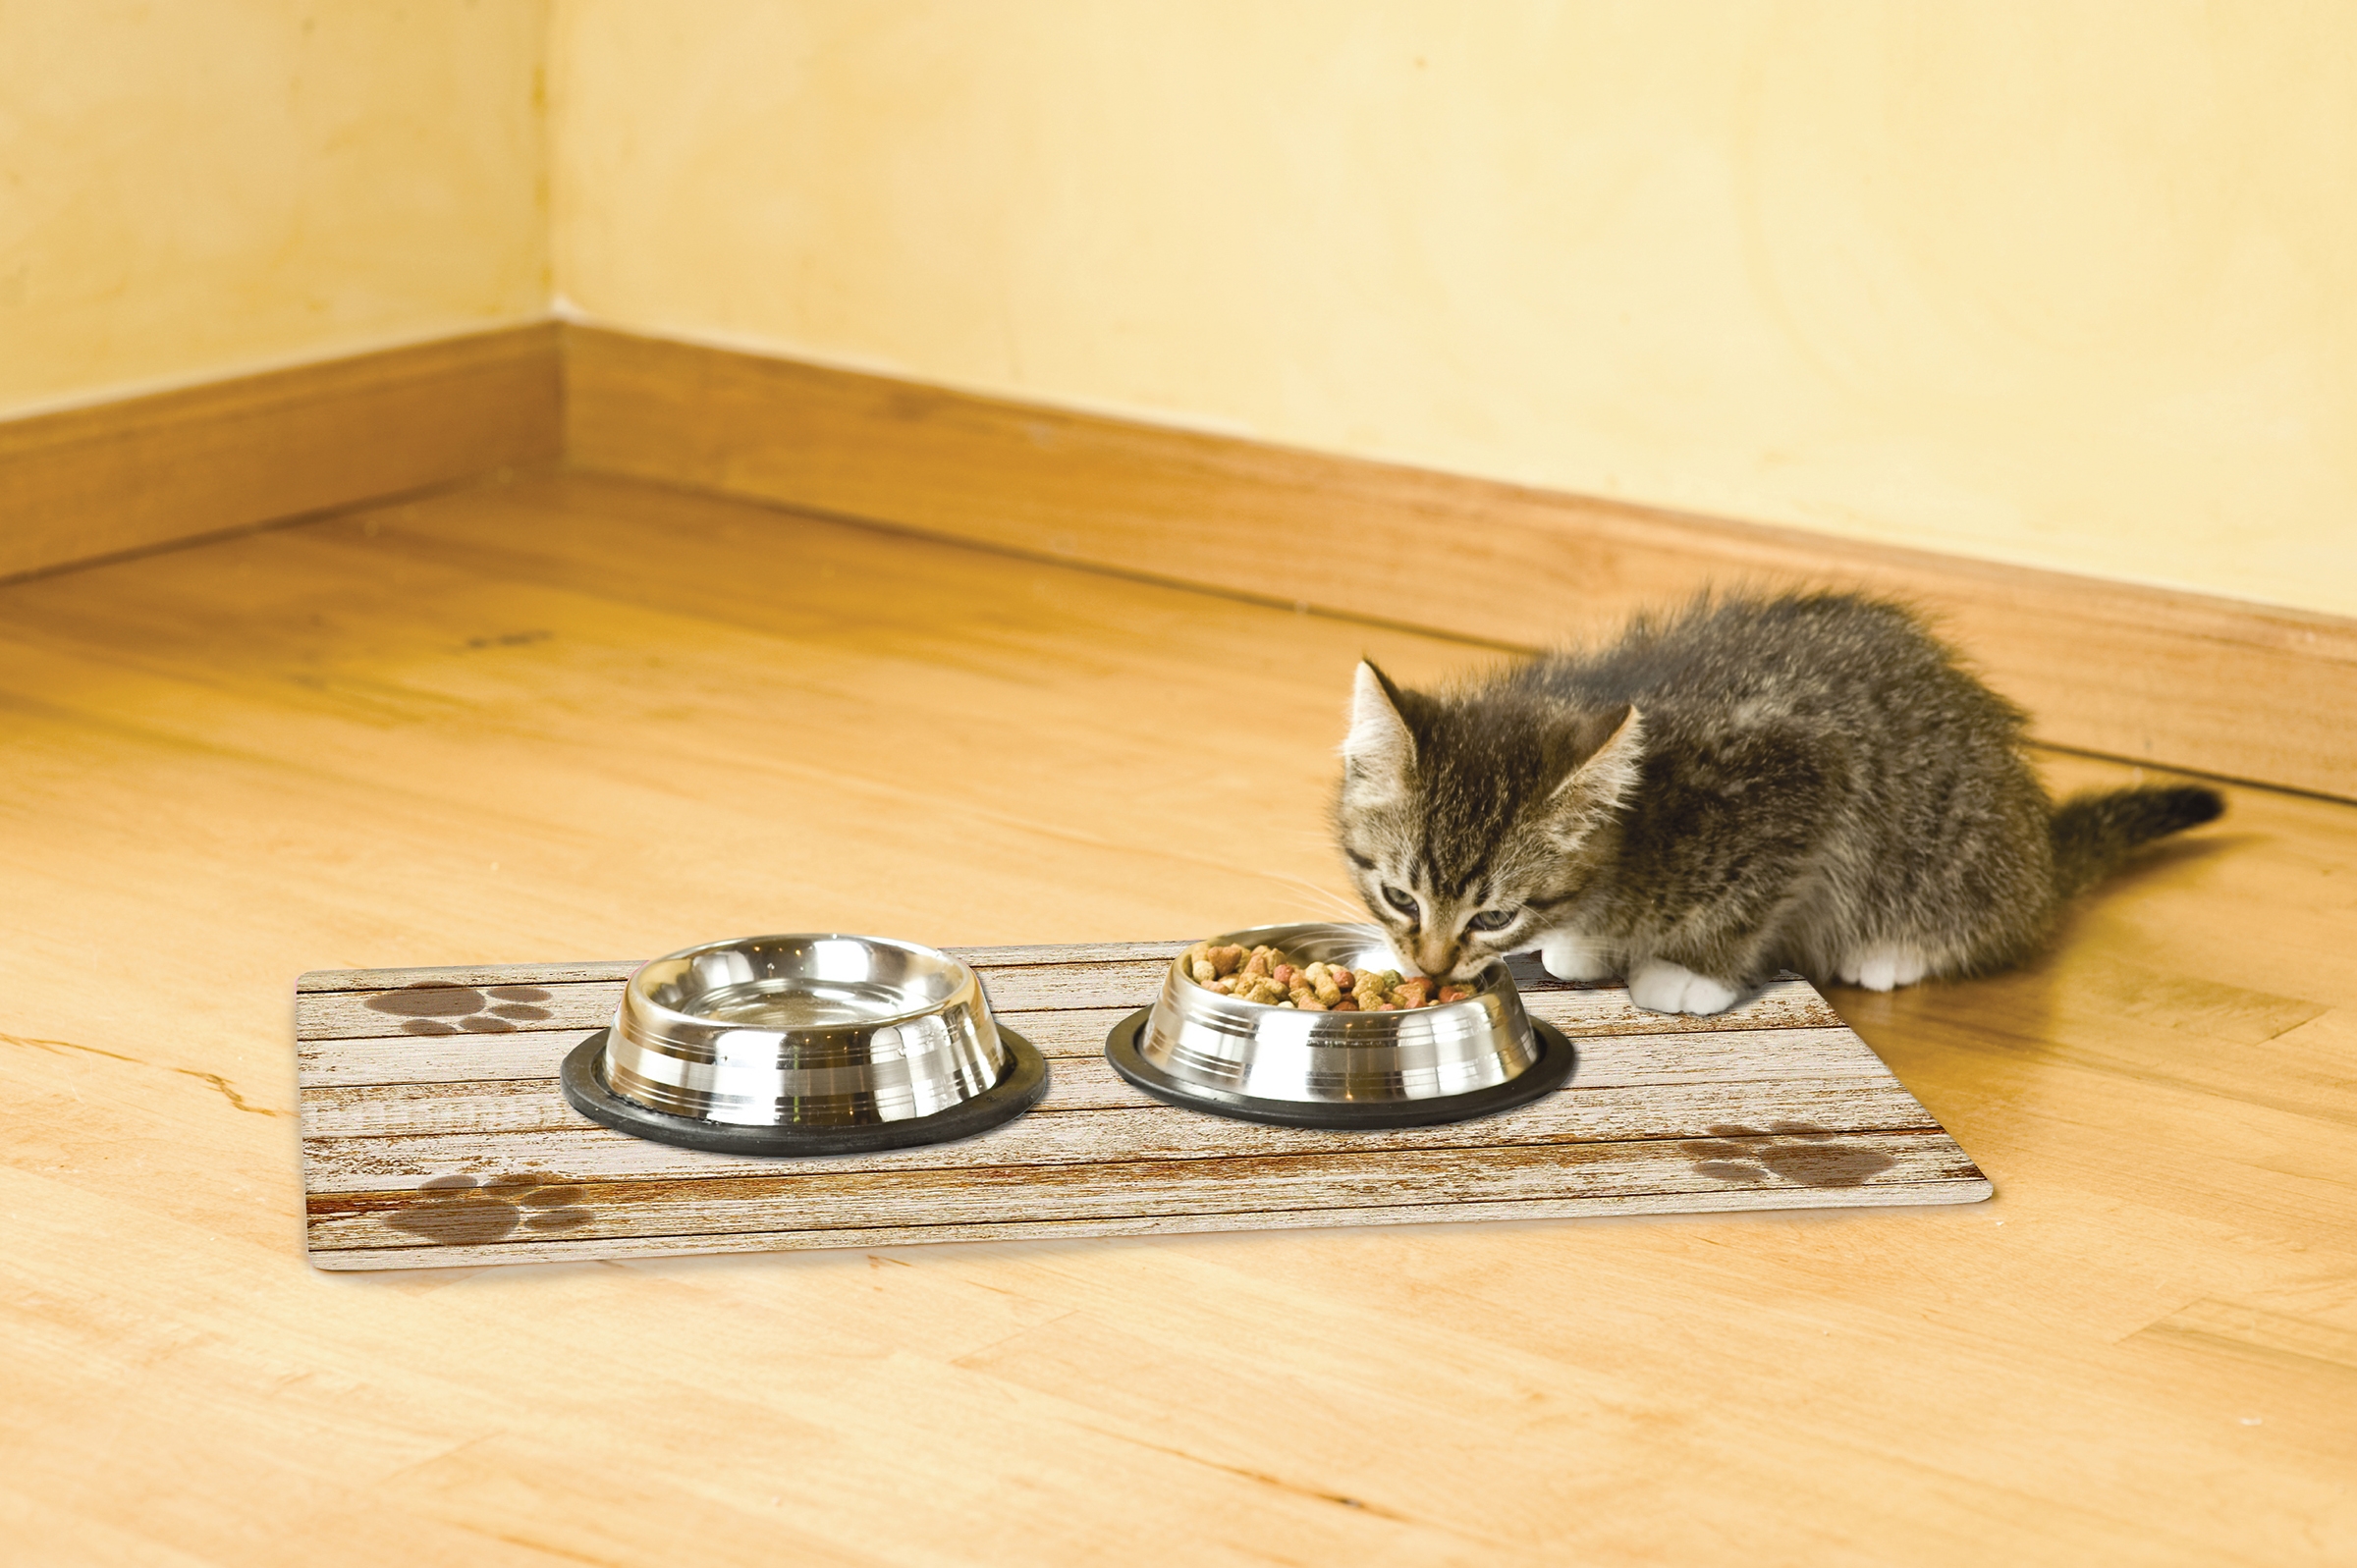 https://www.ecodogsandcats.com/wp-content/uploads/2019/10/ppt1220dw_tan_distressed_wood_placemat_in_use_cat.jpg